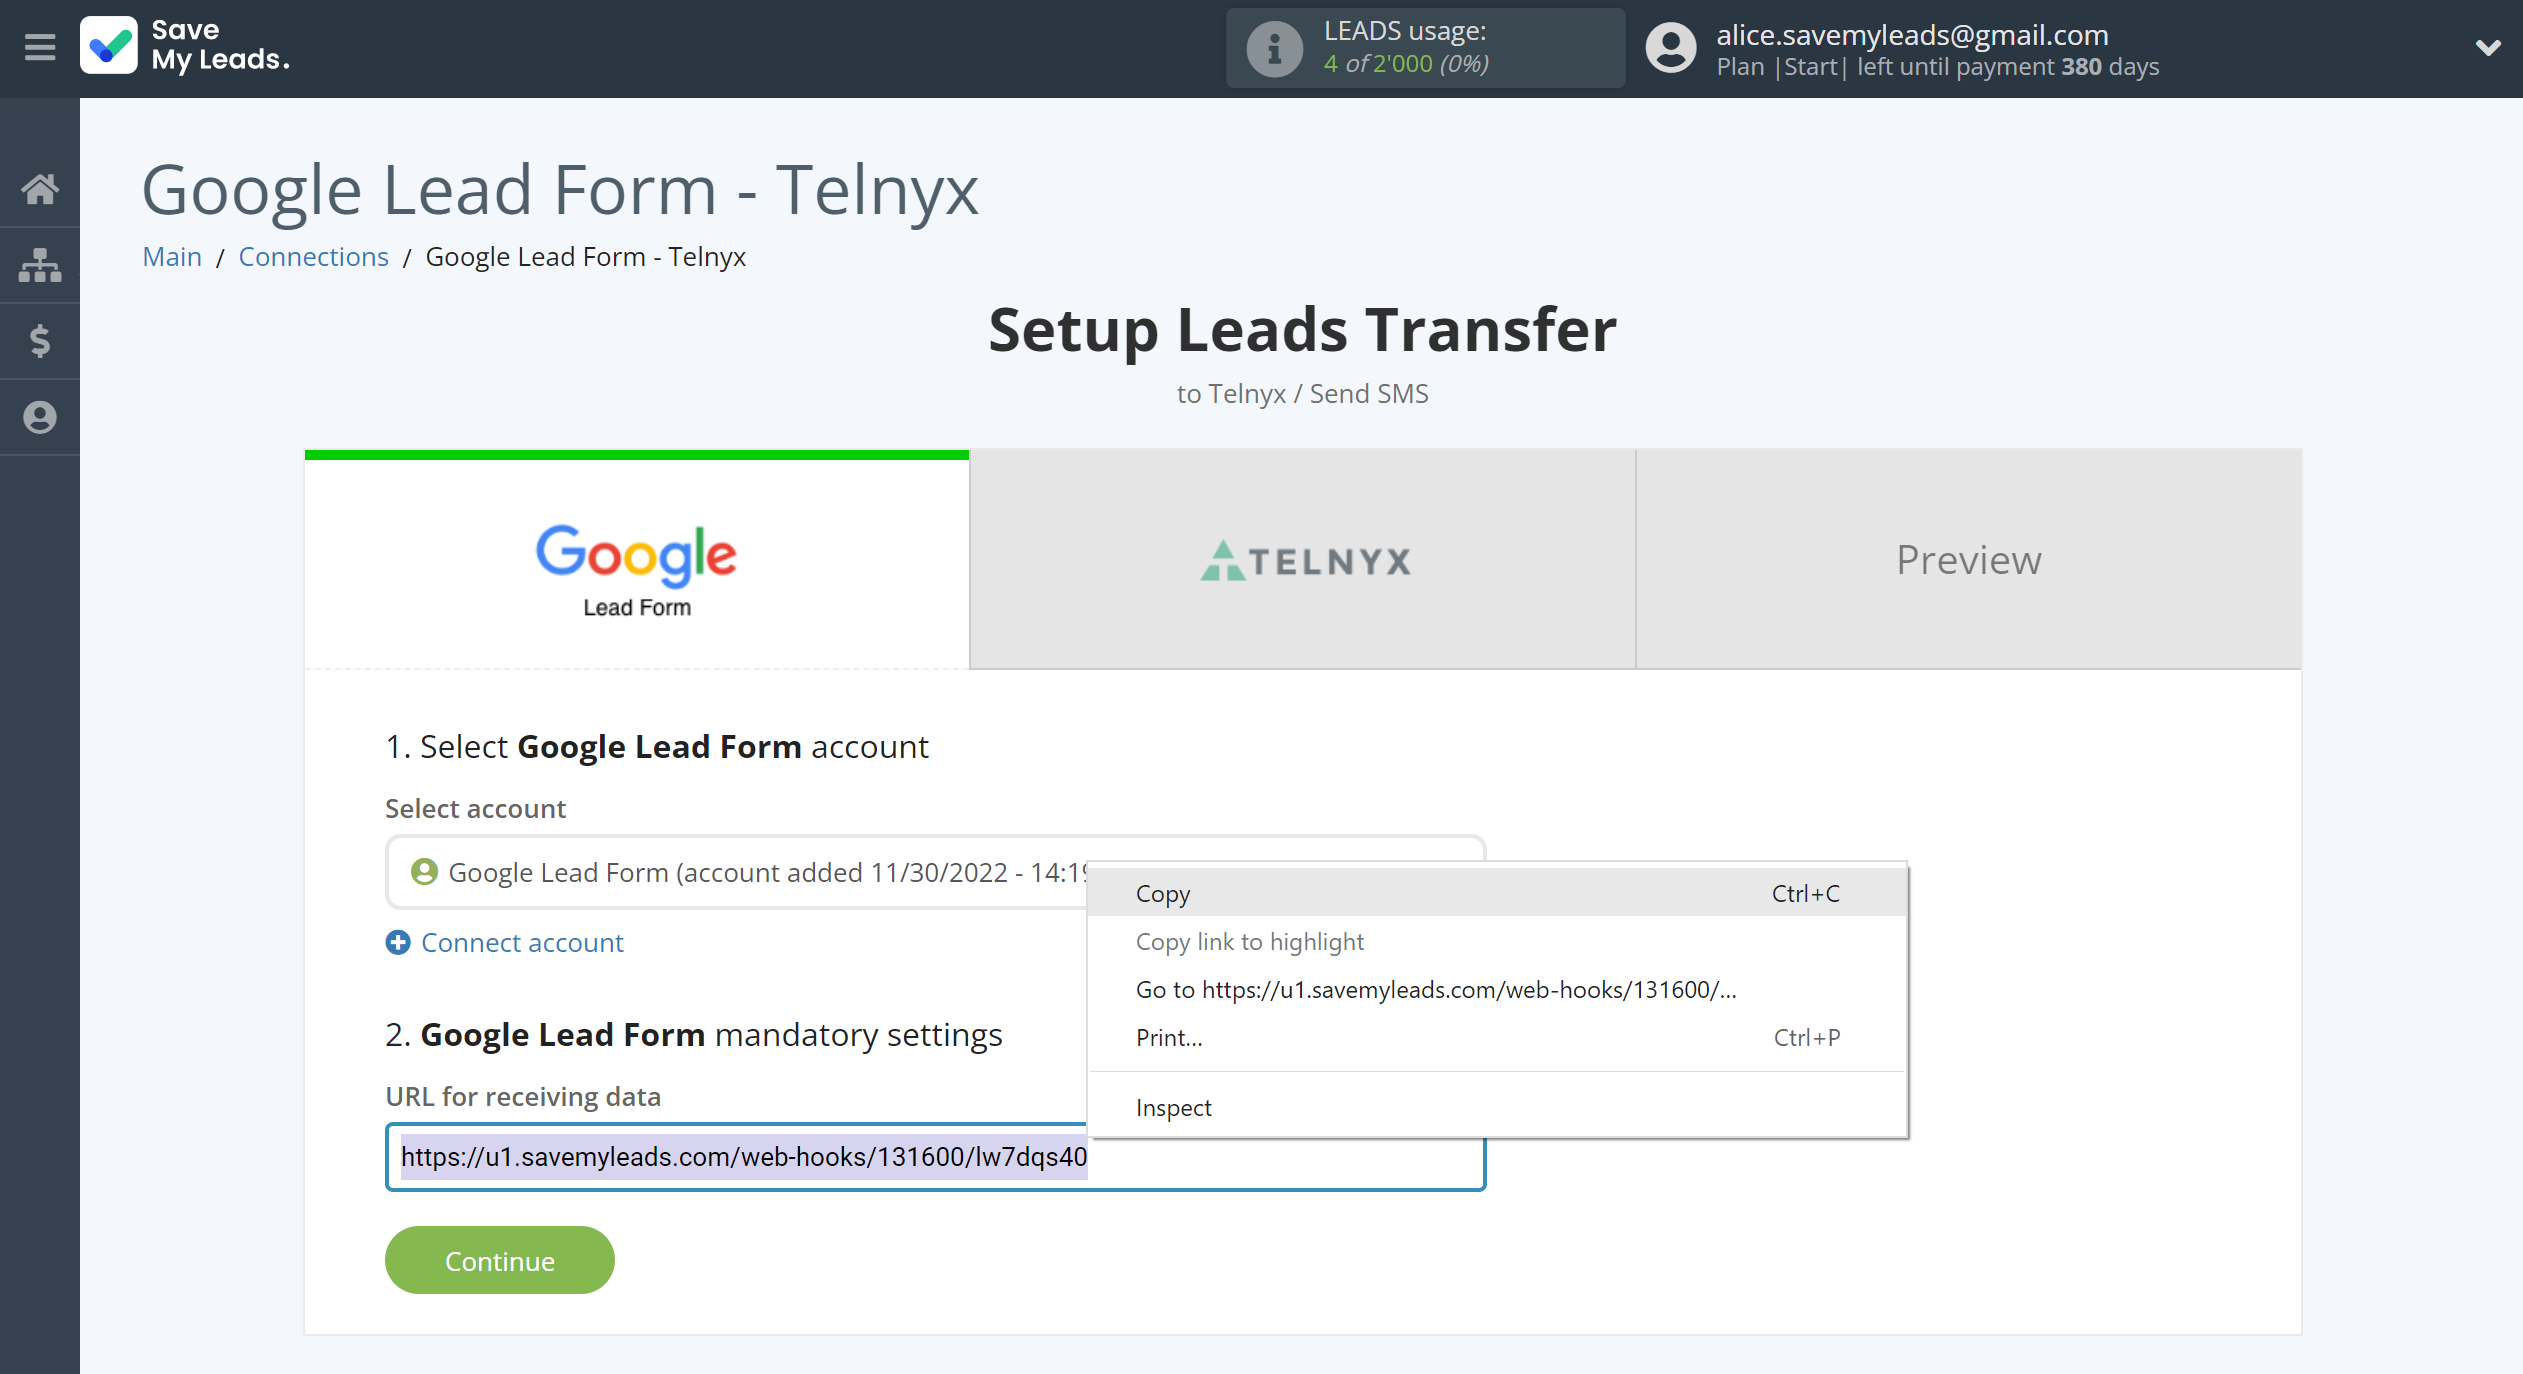 How to Connect Google Lead Form with Telnyx | Data Source account connection